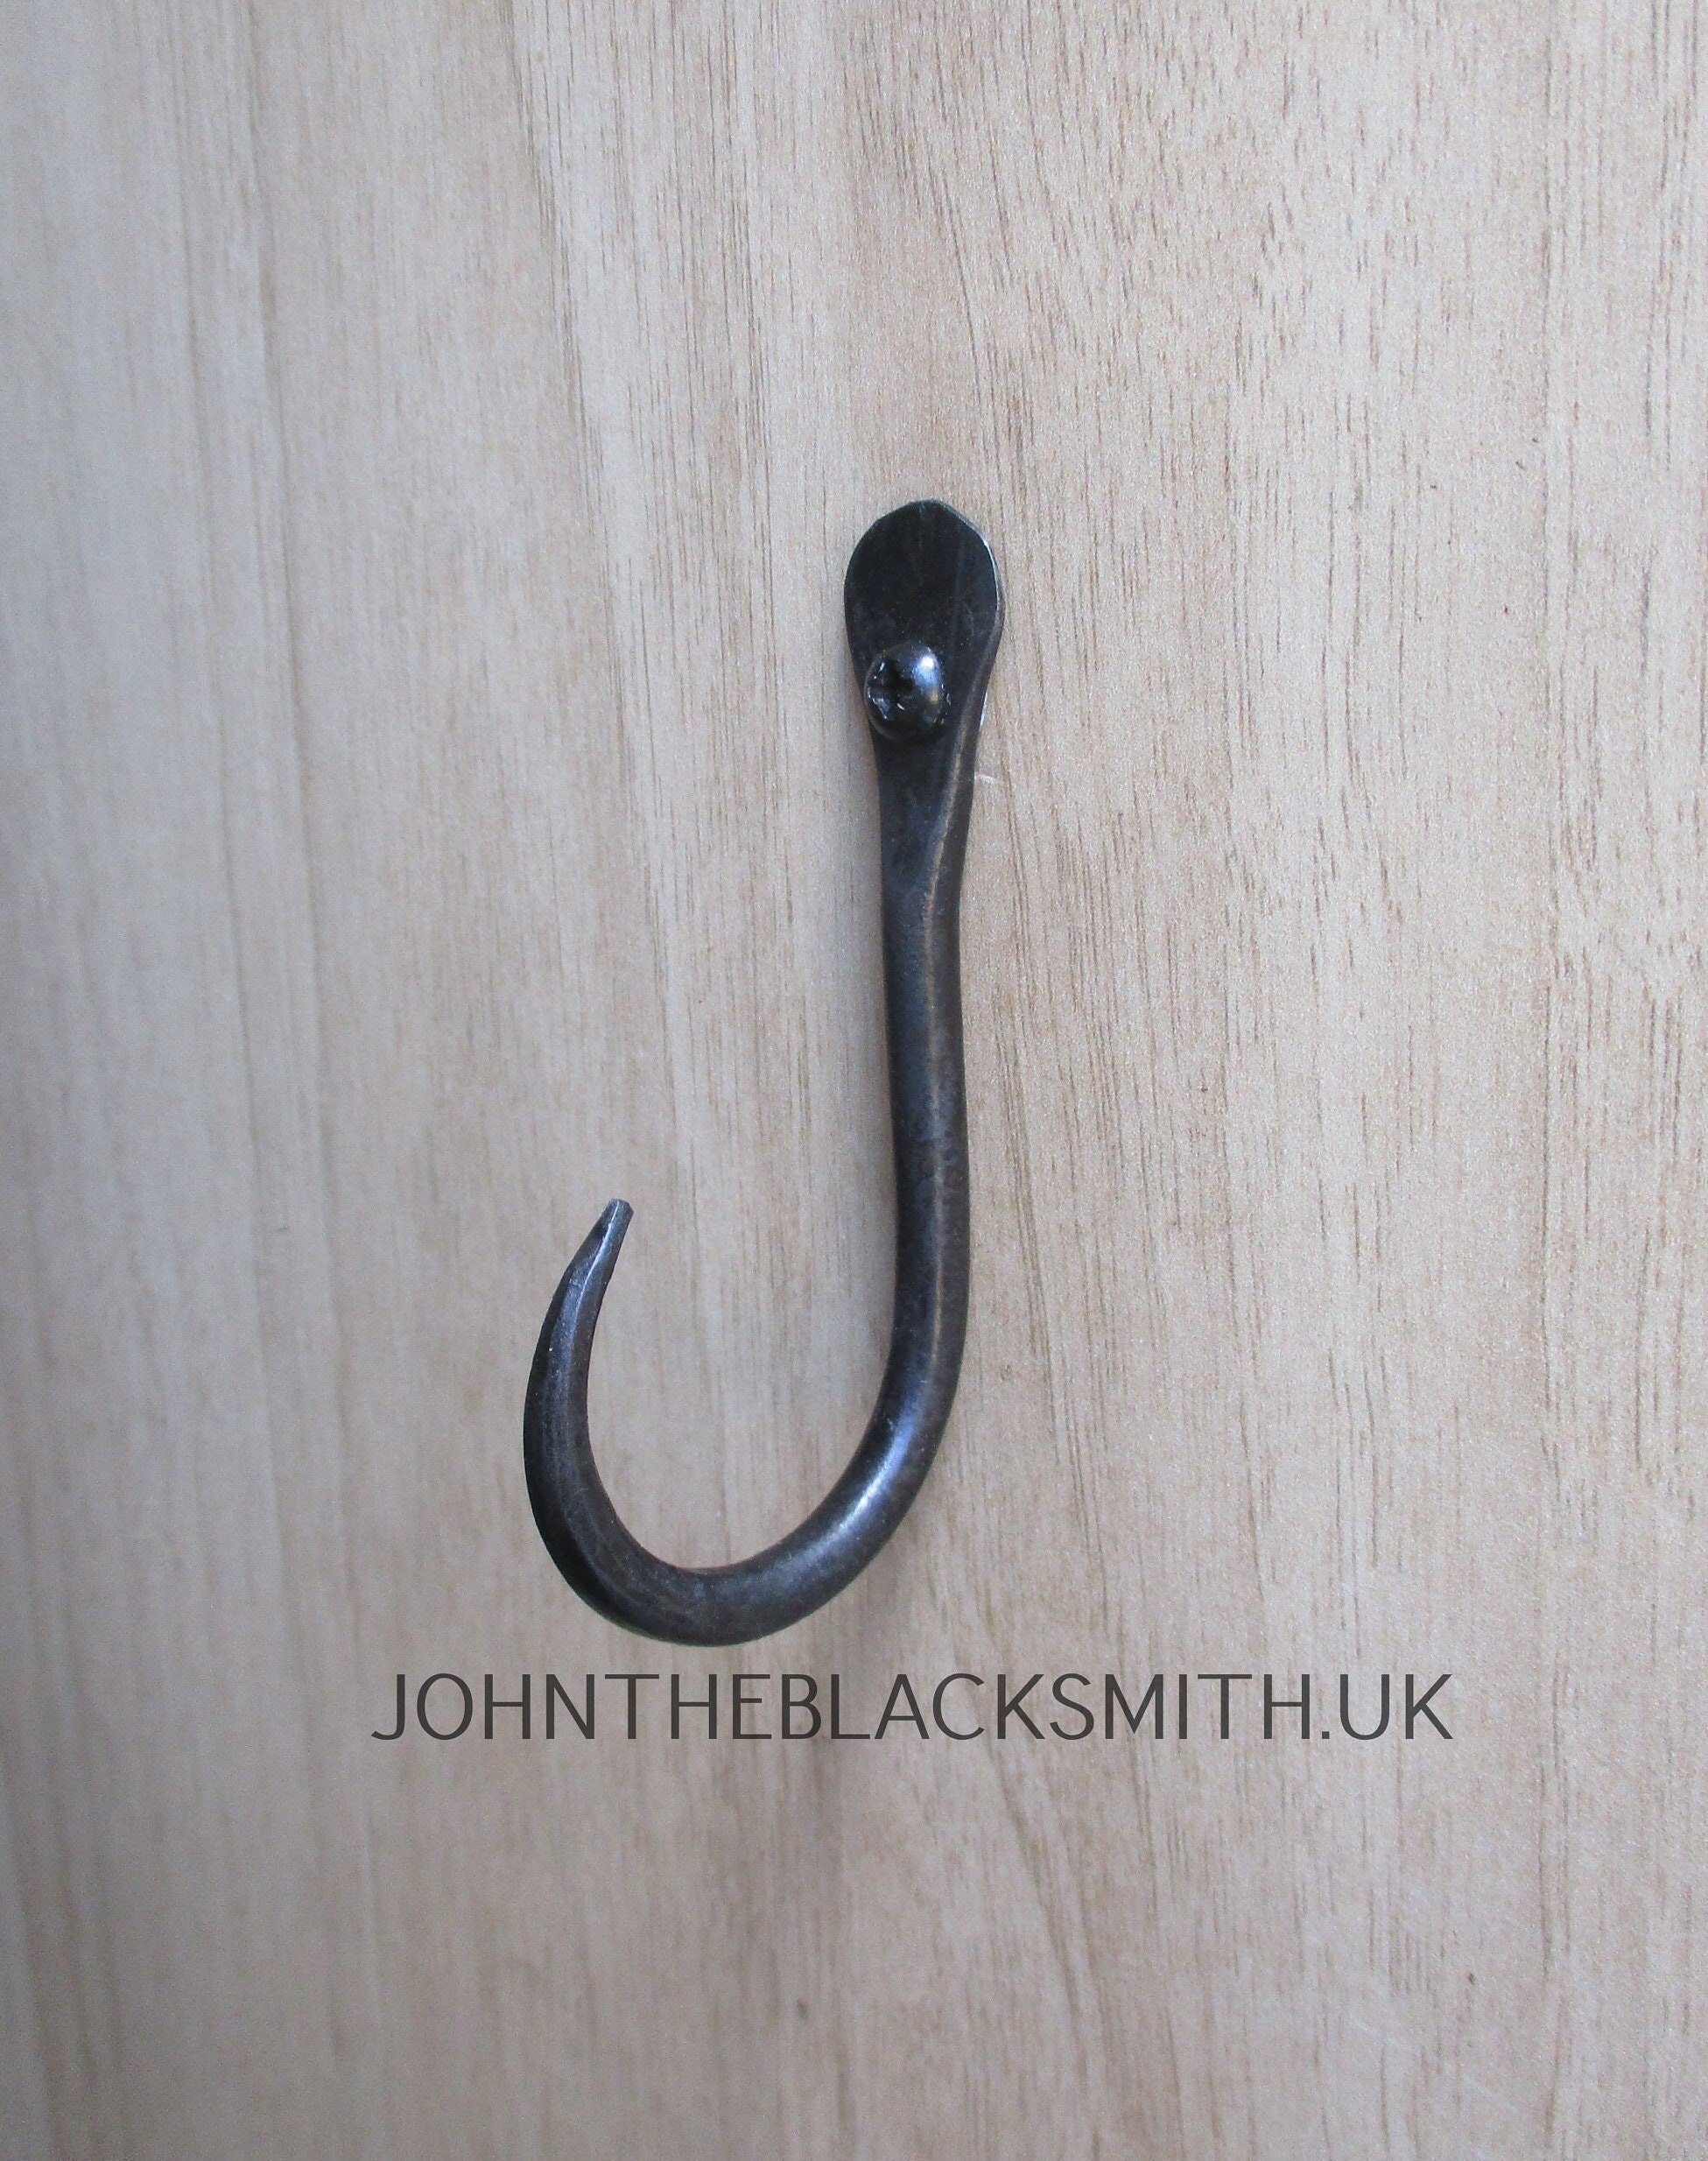 Blacksmith Hand Forged, Wrought Iron Traditional J Barn Hook